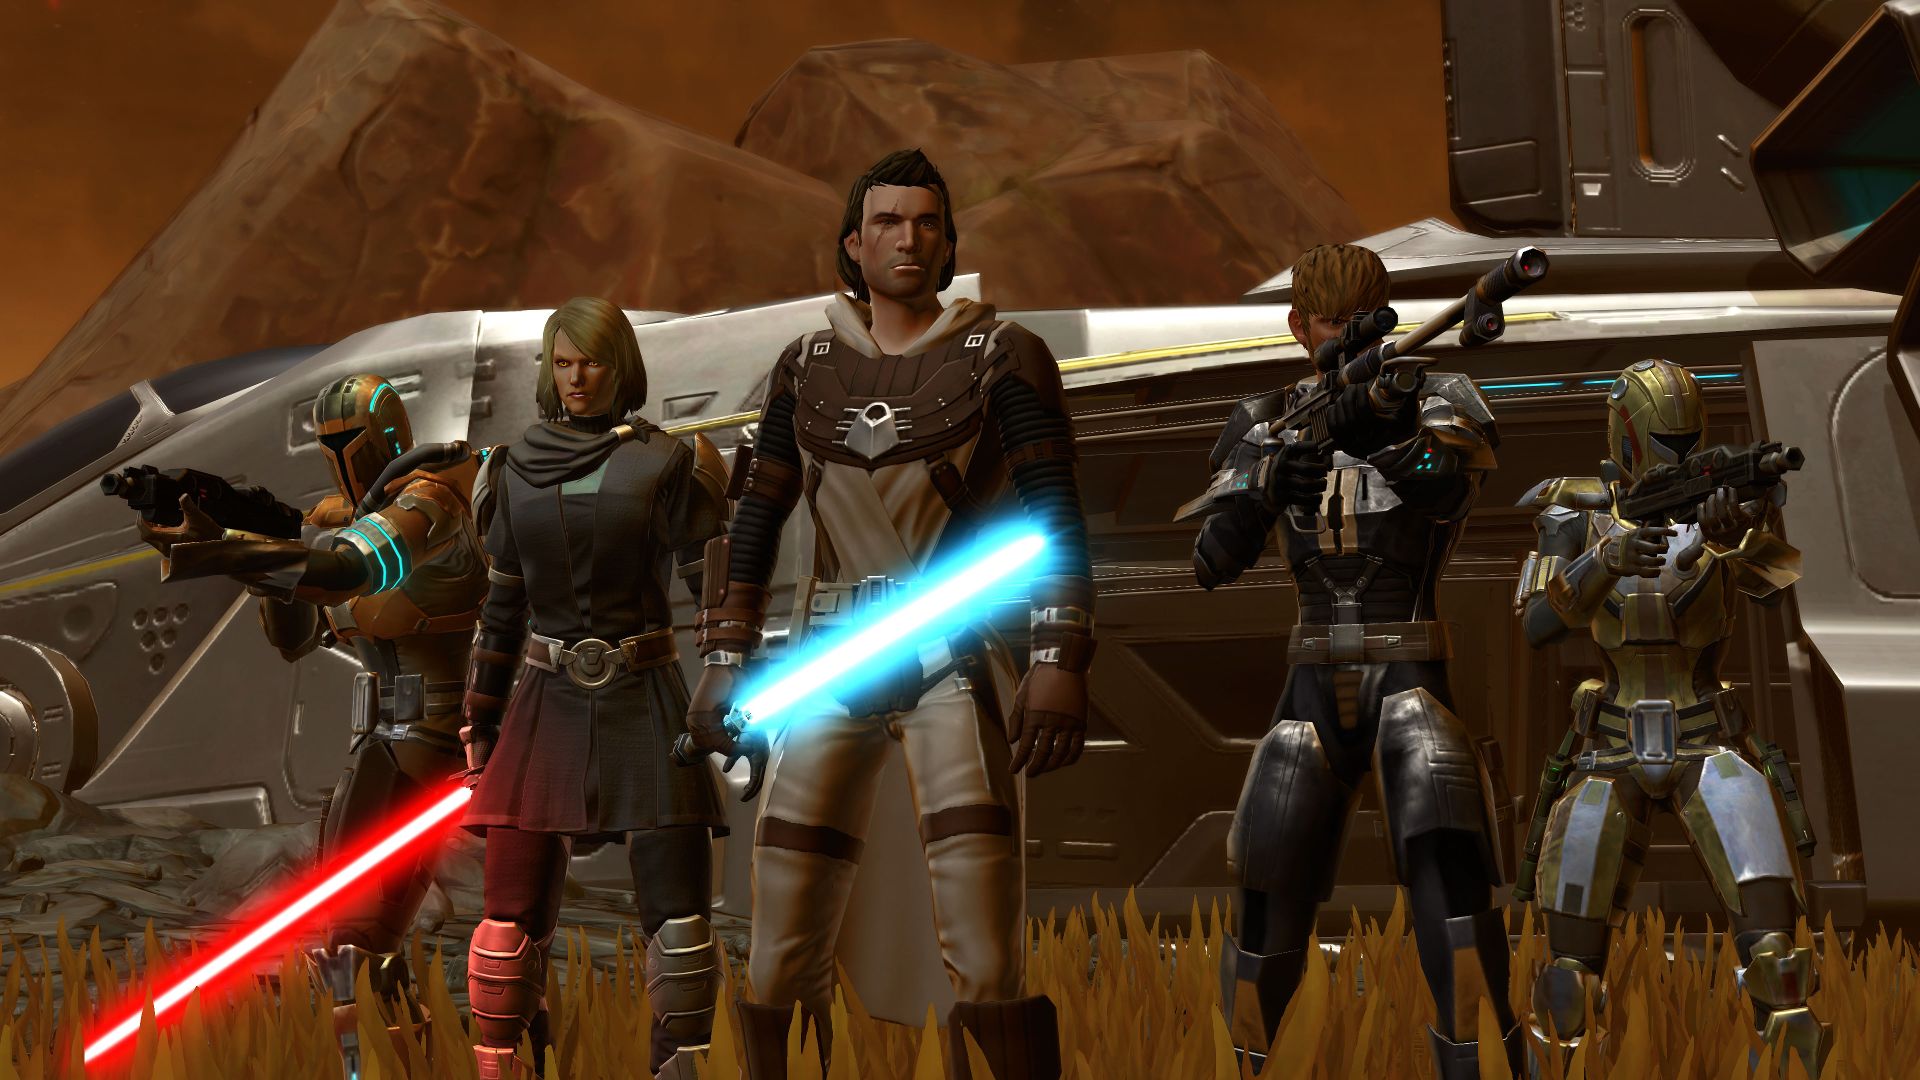 Star Wars: The Old Republic has just launched on Steam | PC Gamer